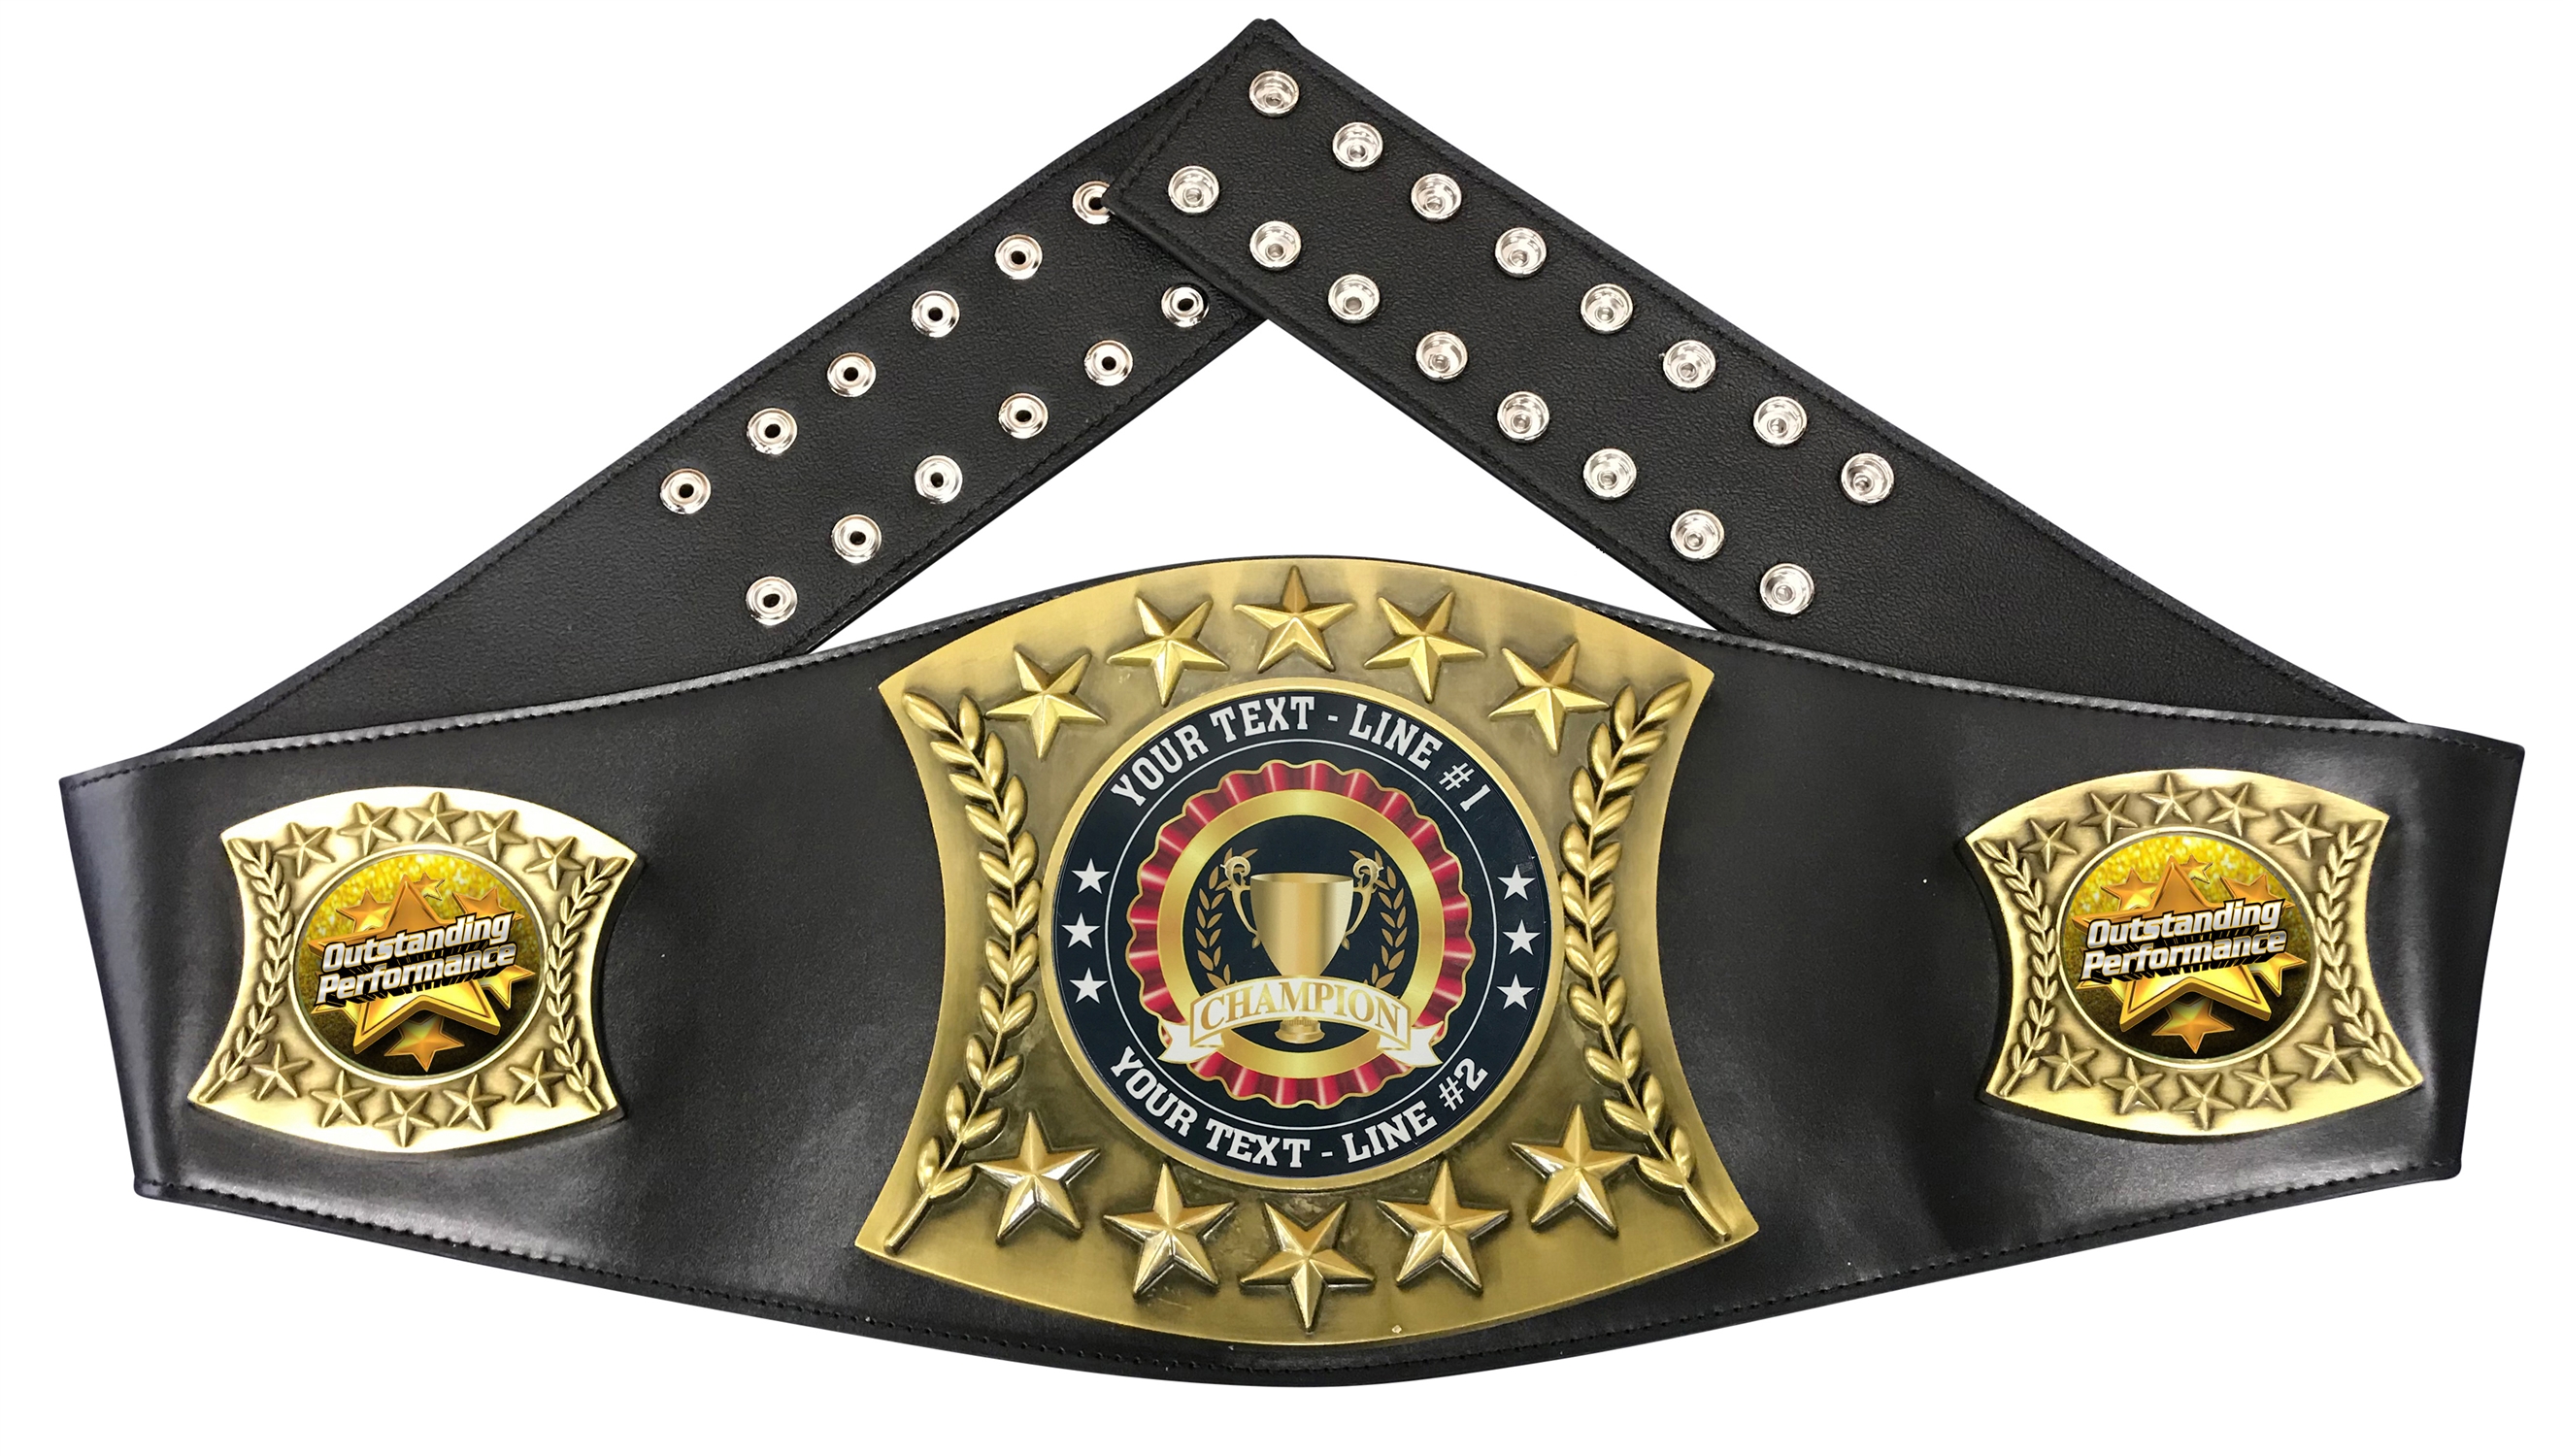 Outstanding Performance Personalized Championship Belt